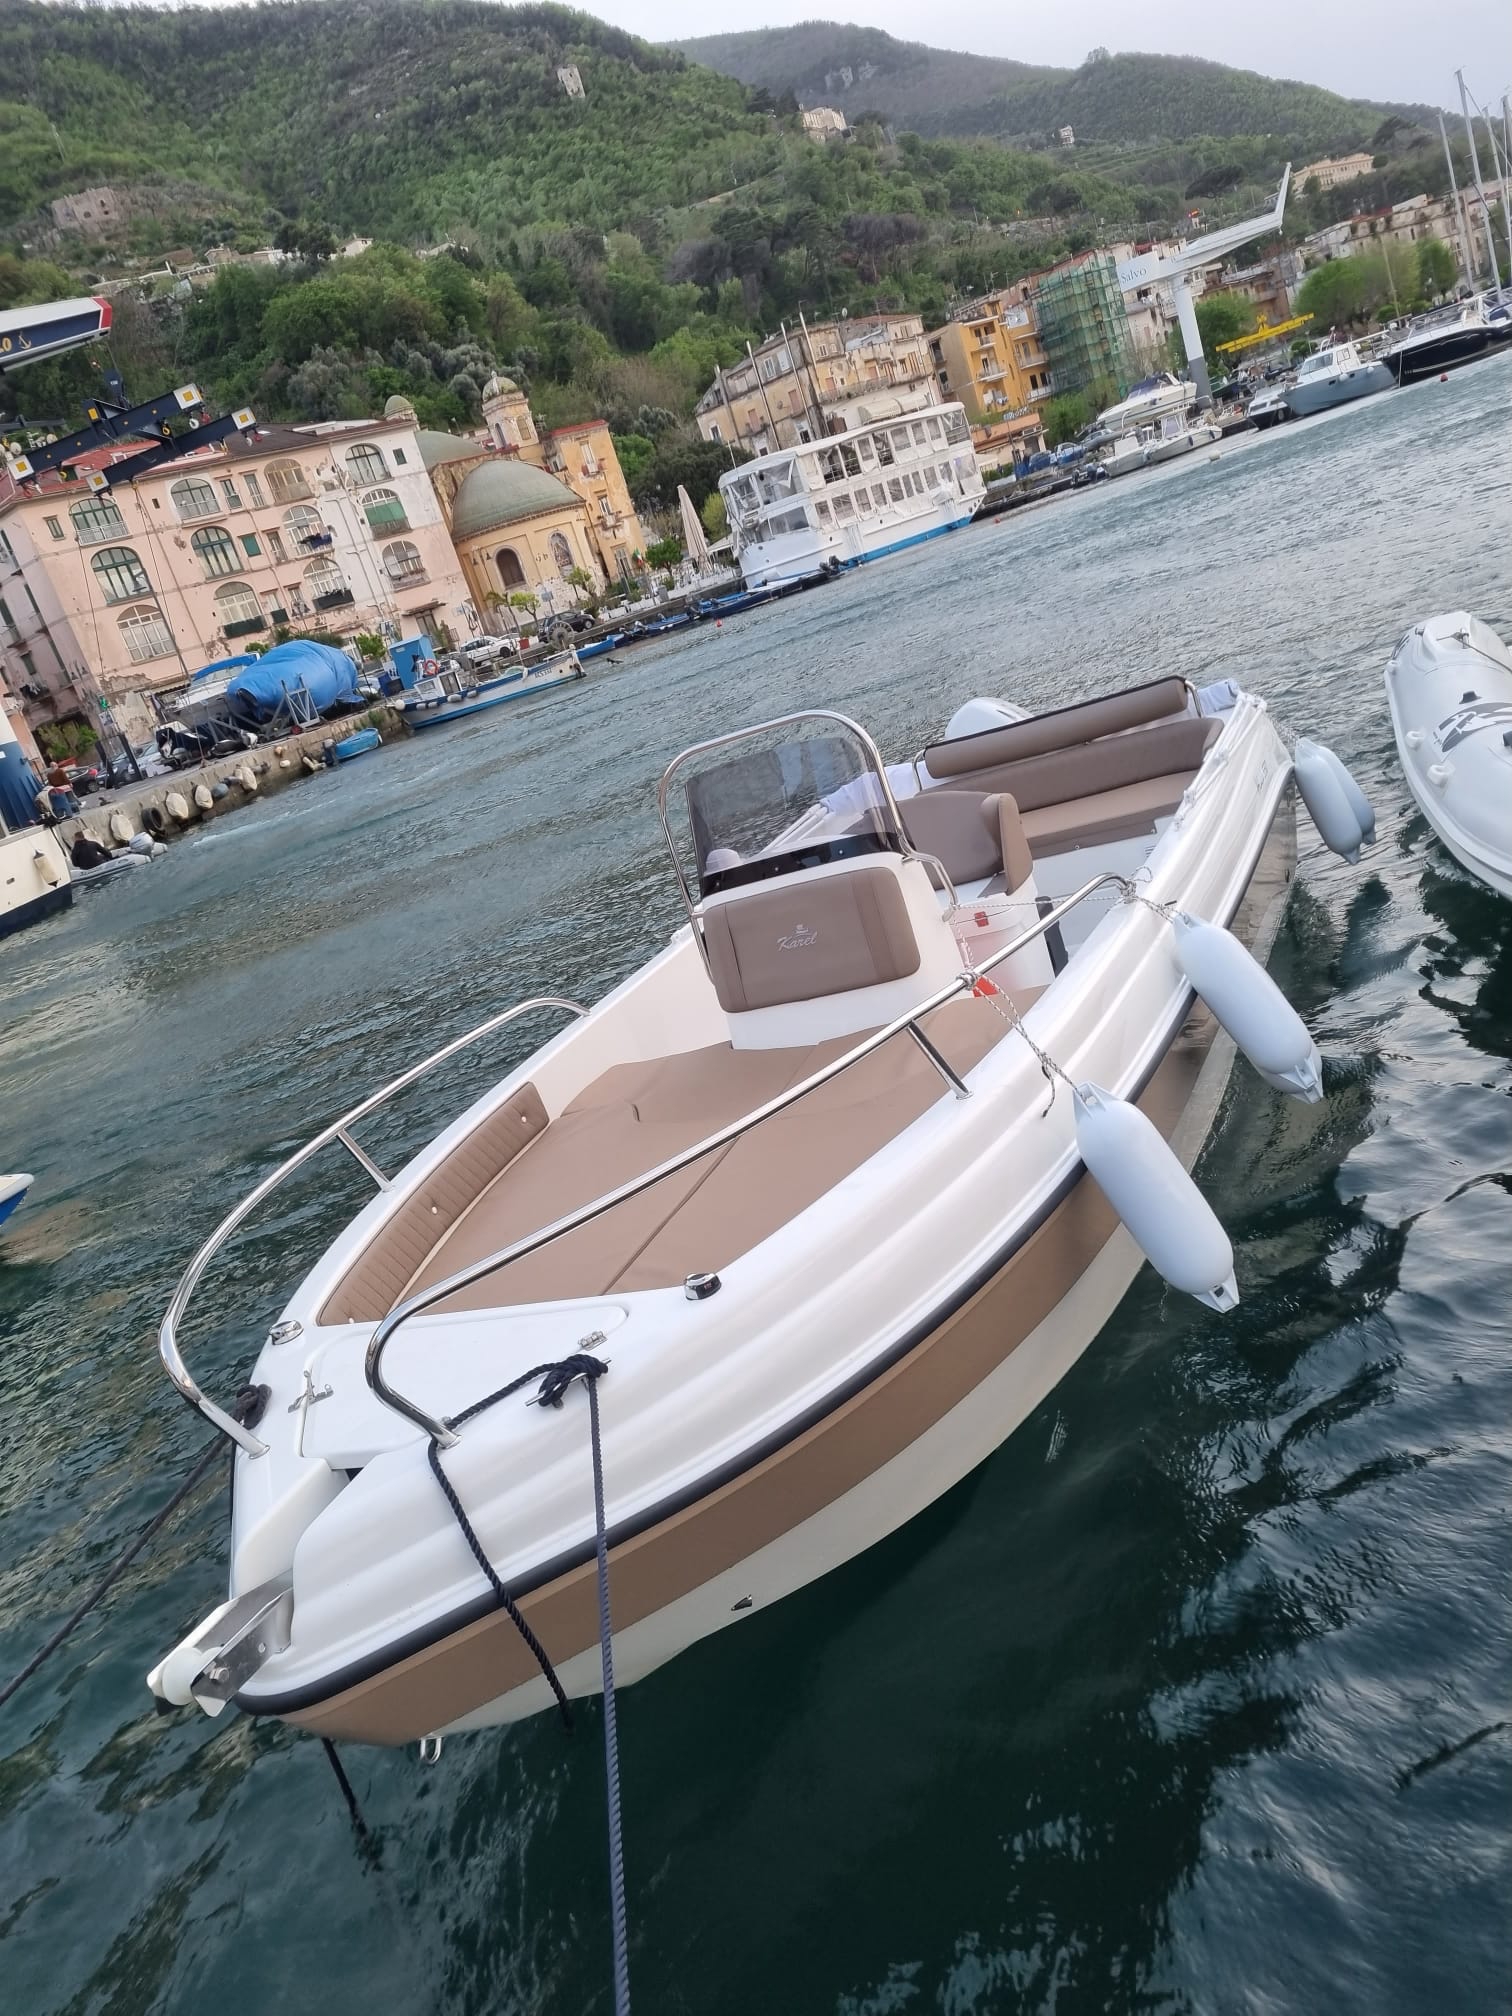 Ithaca 550 - Yacht Charter Naples & Boat hire in Italy Campania Bay of Naples Castellammare di Stabia Porto di Castellammare di Stabia 3